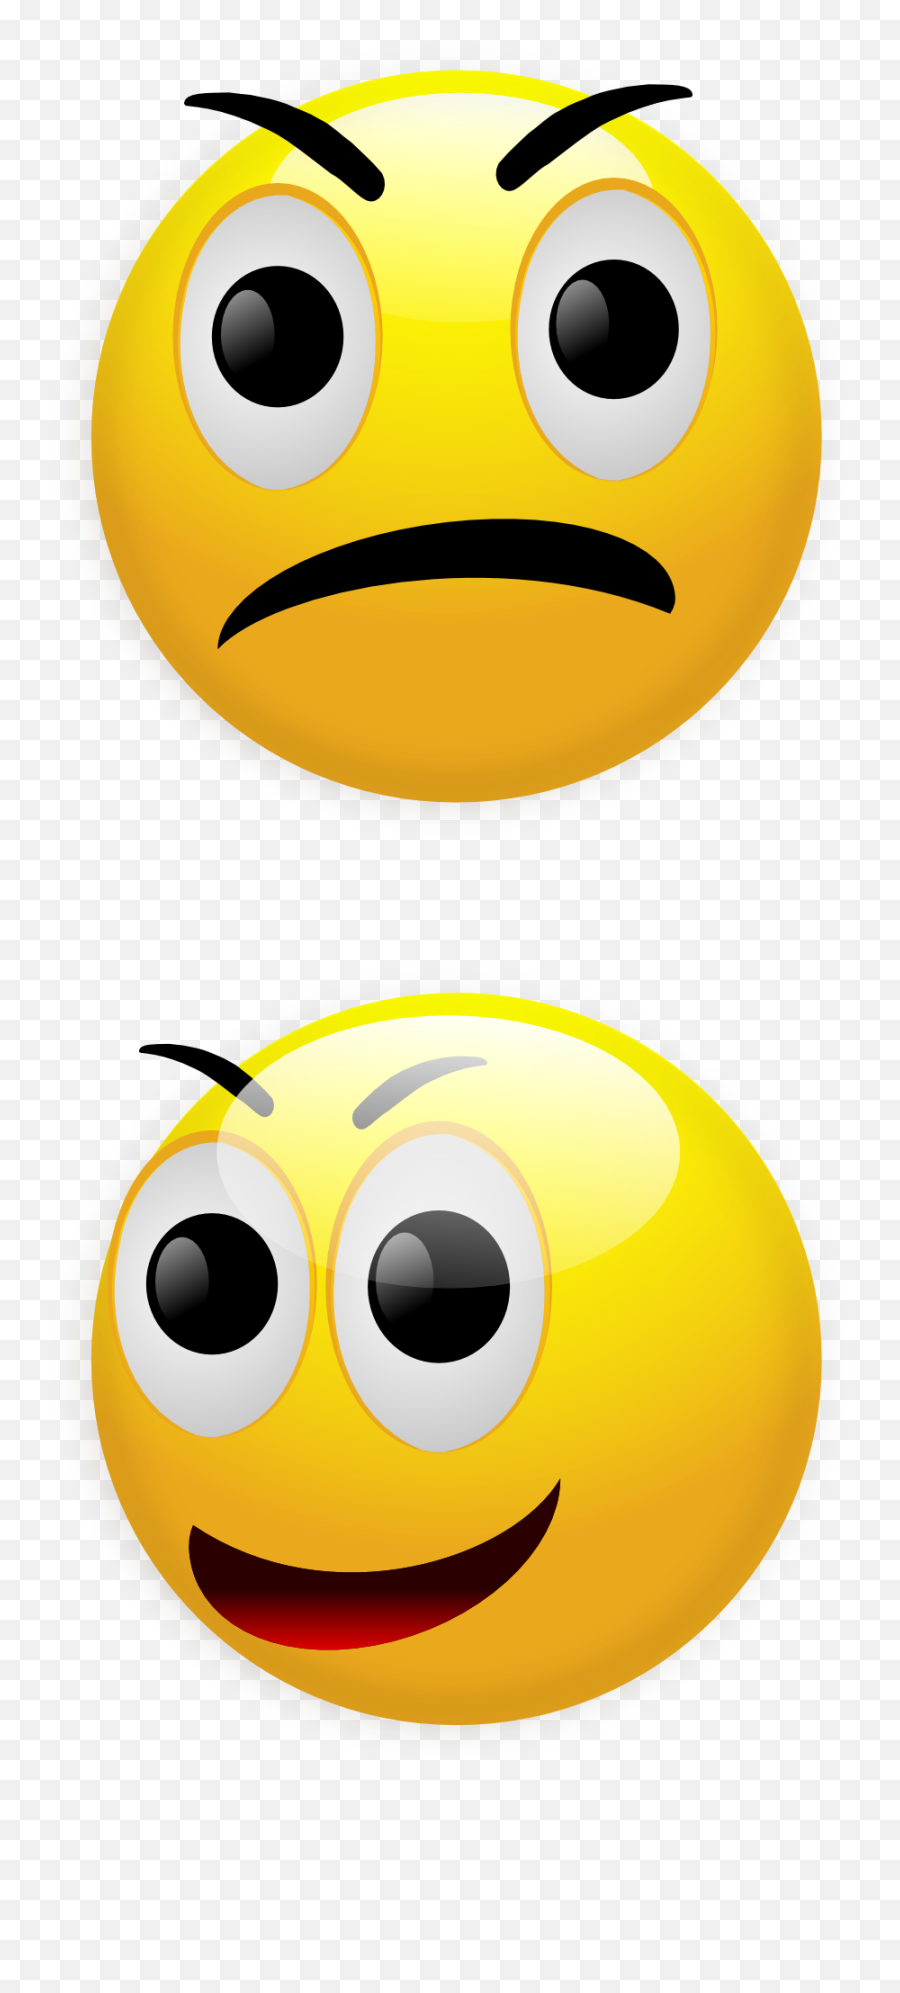 Smiley Angry Happy Unhappy Png Picpng - Transparent Background Emoji Gif,Anger Emoticon